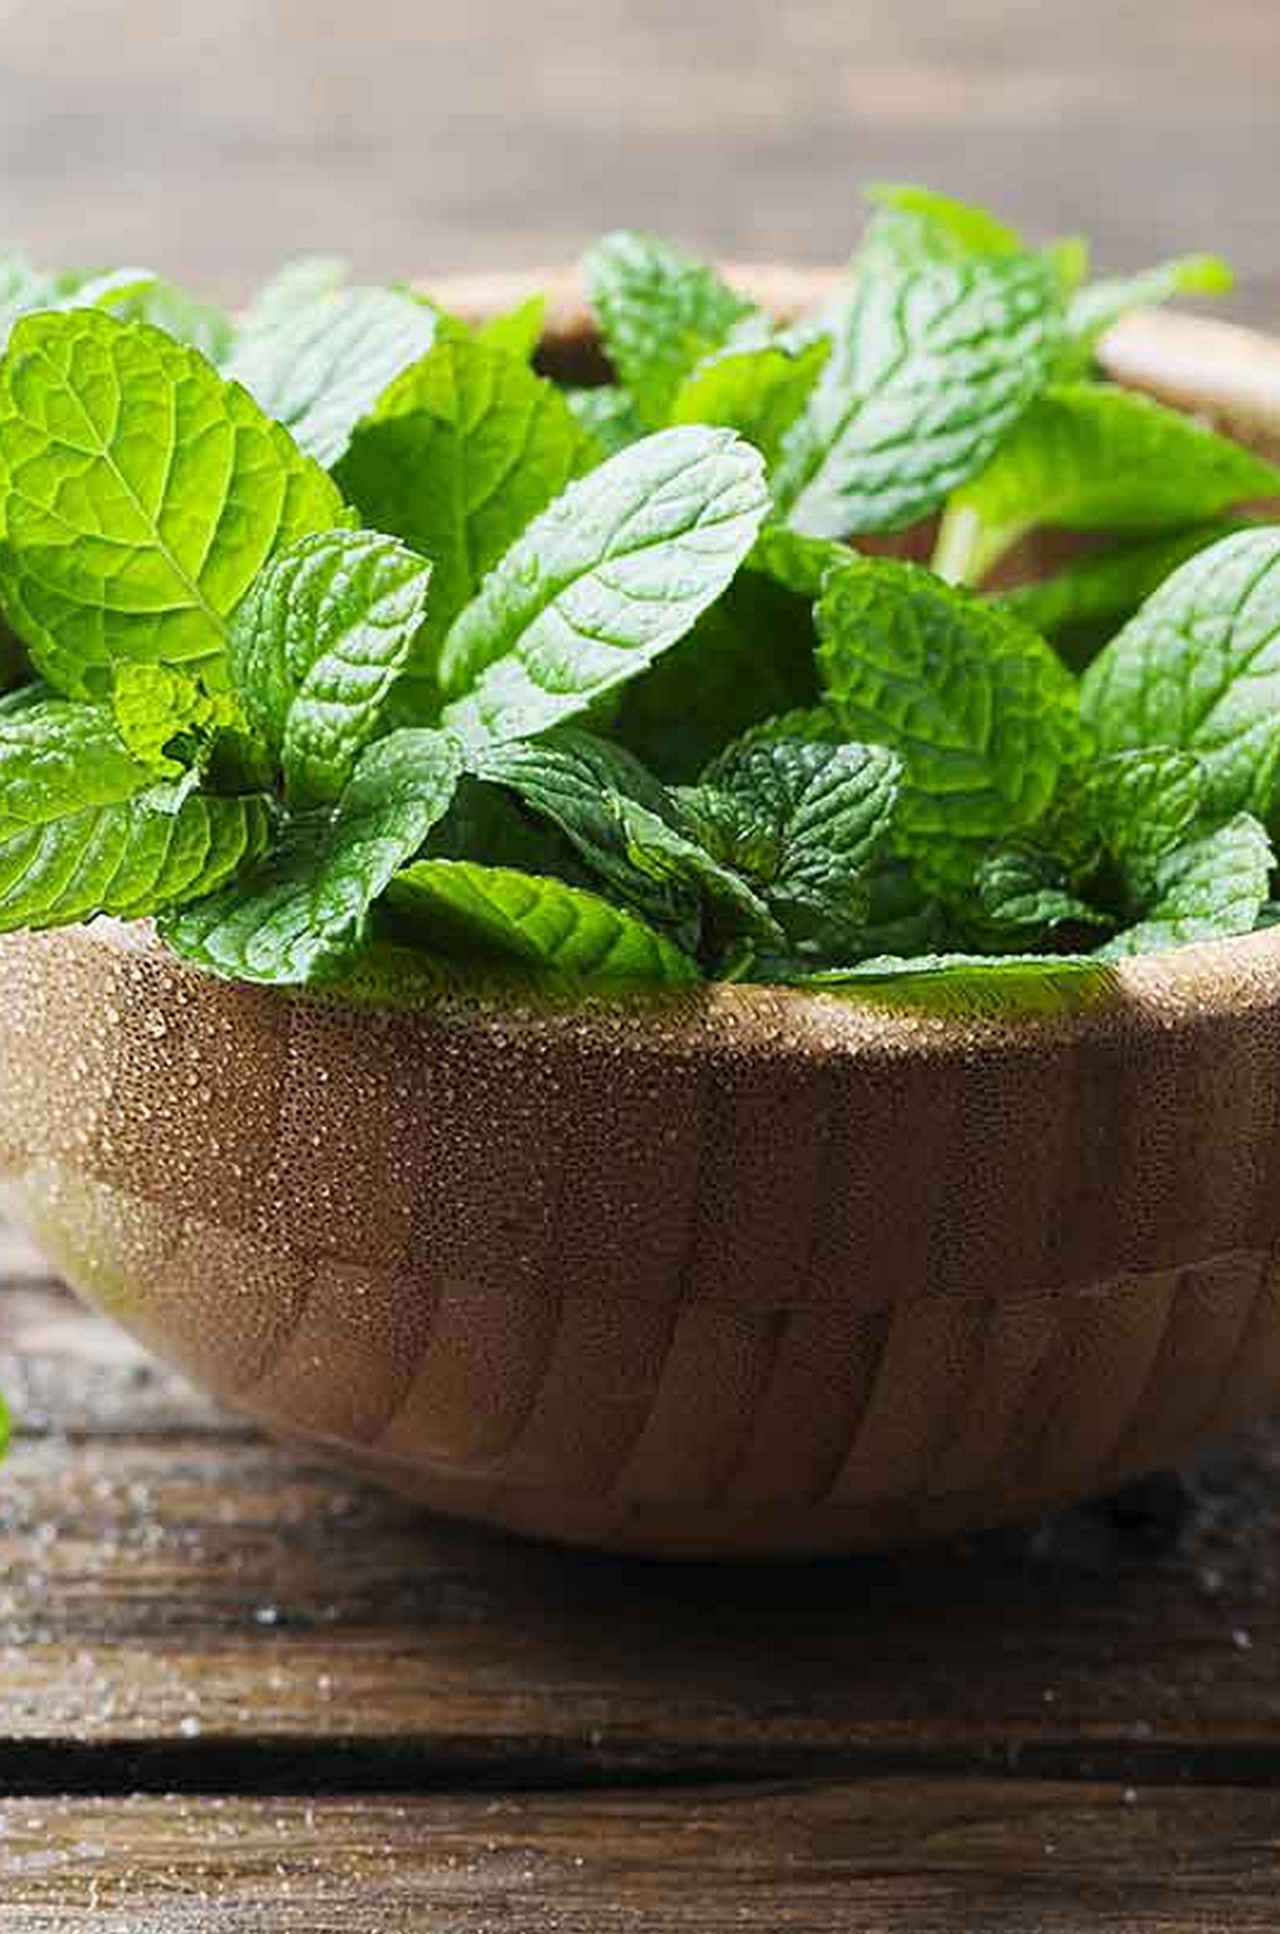  23 Benefits Of Peppermint Leaves For Skin, Hair, And Health